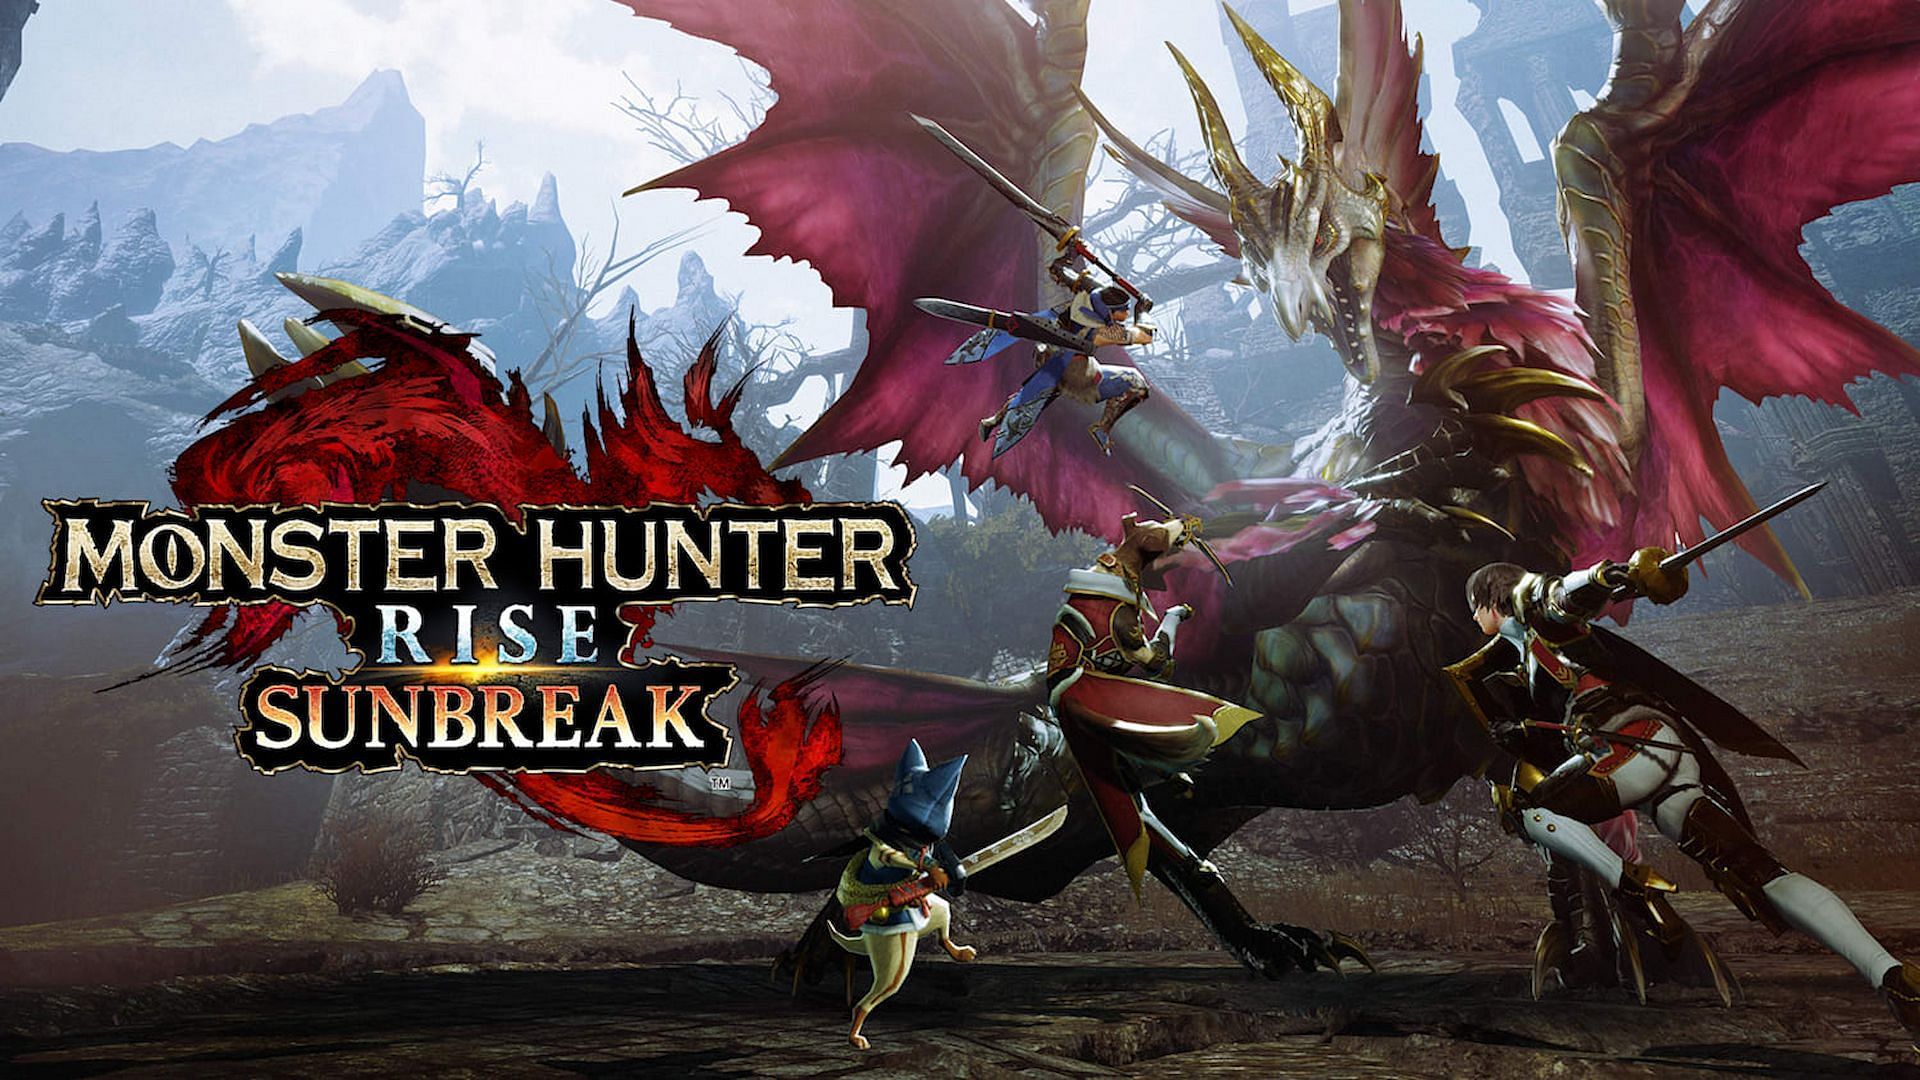 Players are able to get some great items when they pre-order Monster Hunter Rise: Sunbreak (Image via Capcom)